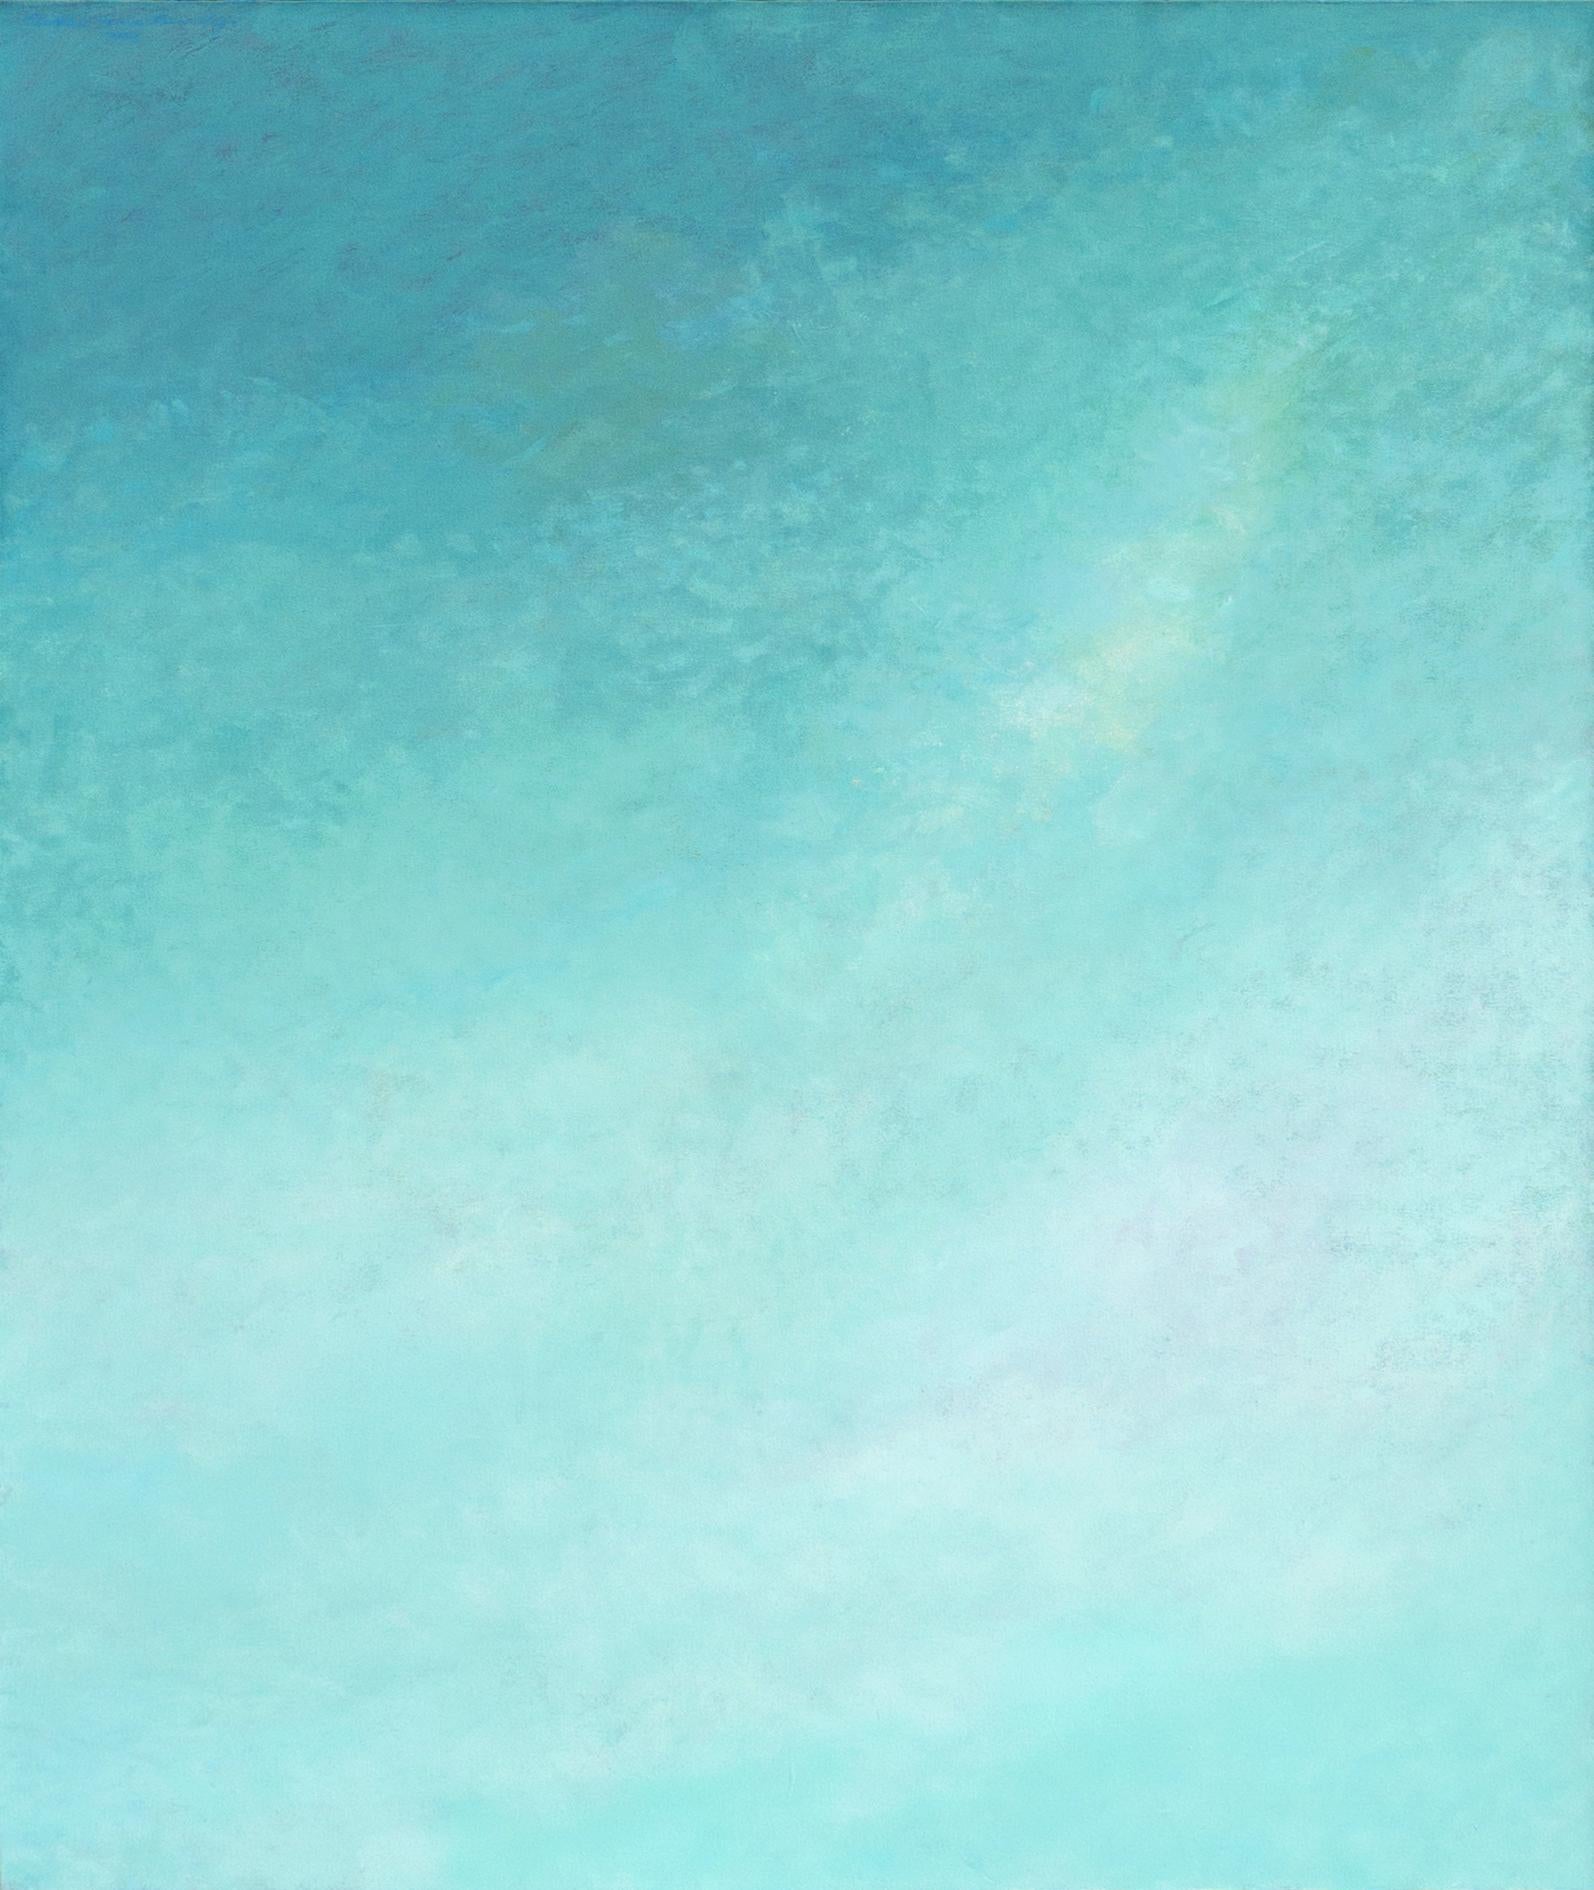 Michael Bradley Abstract Painting - 'Celestial Abstract', Gump's, San Francisco Bay Area Abstraction, Sky, Clouds